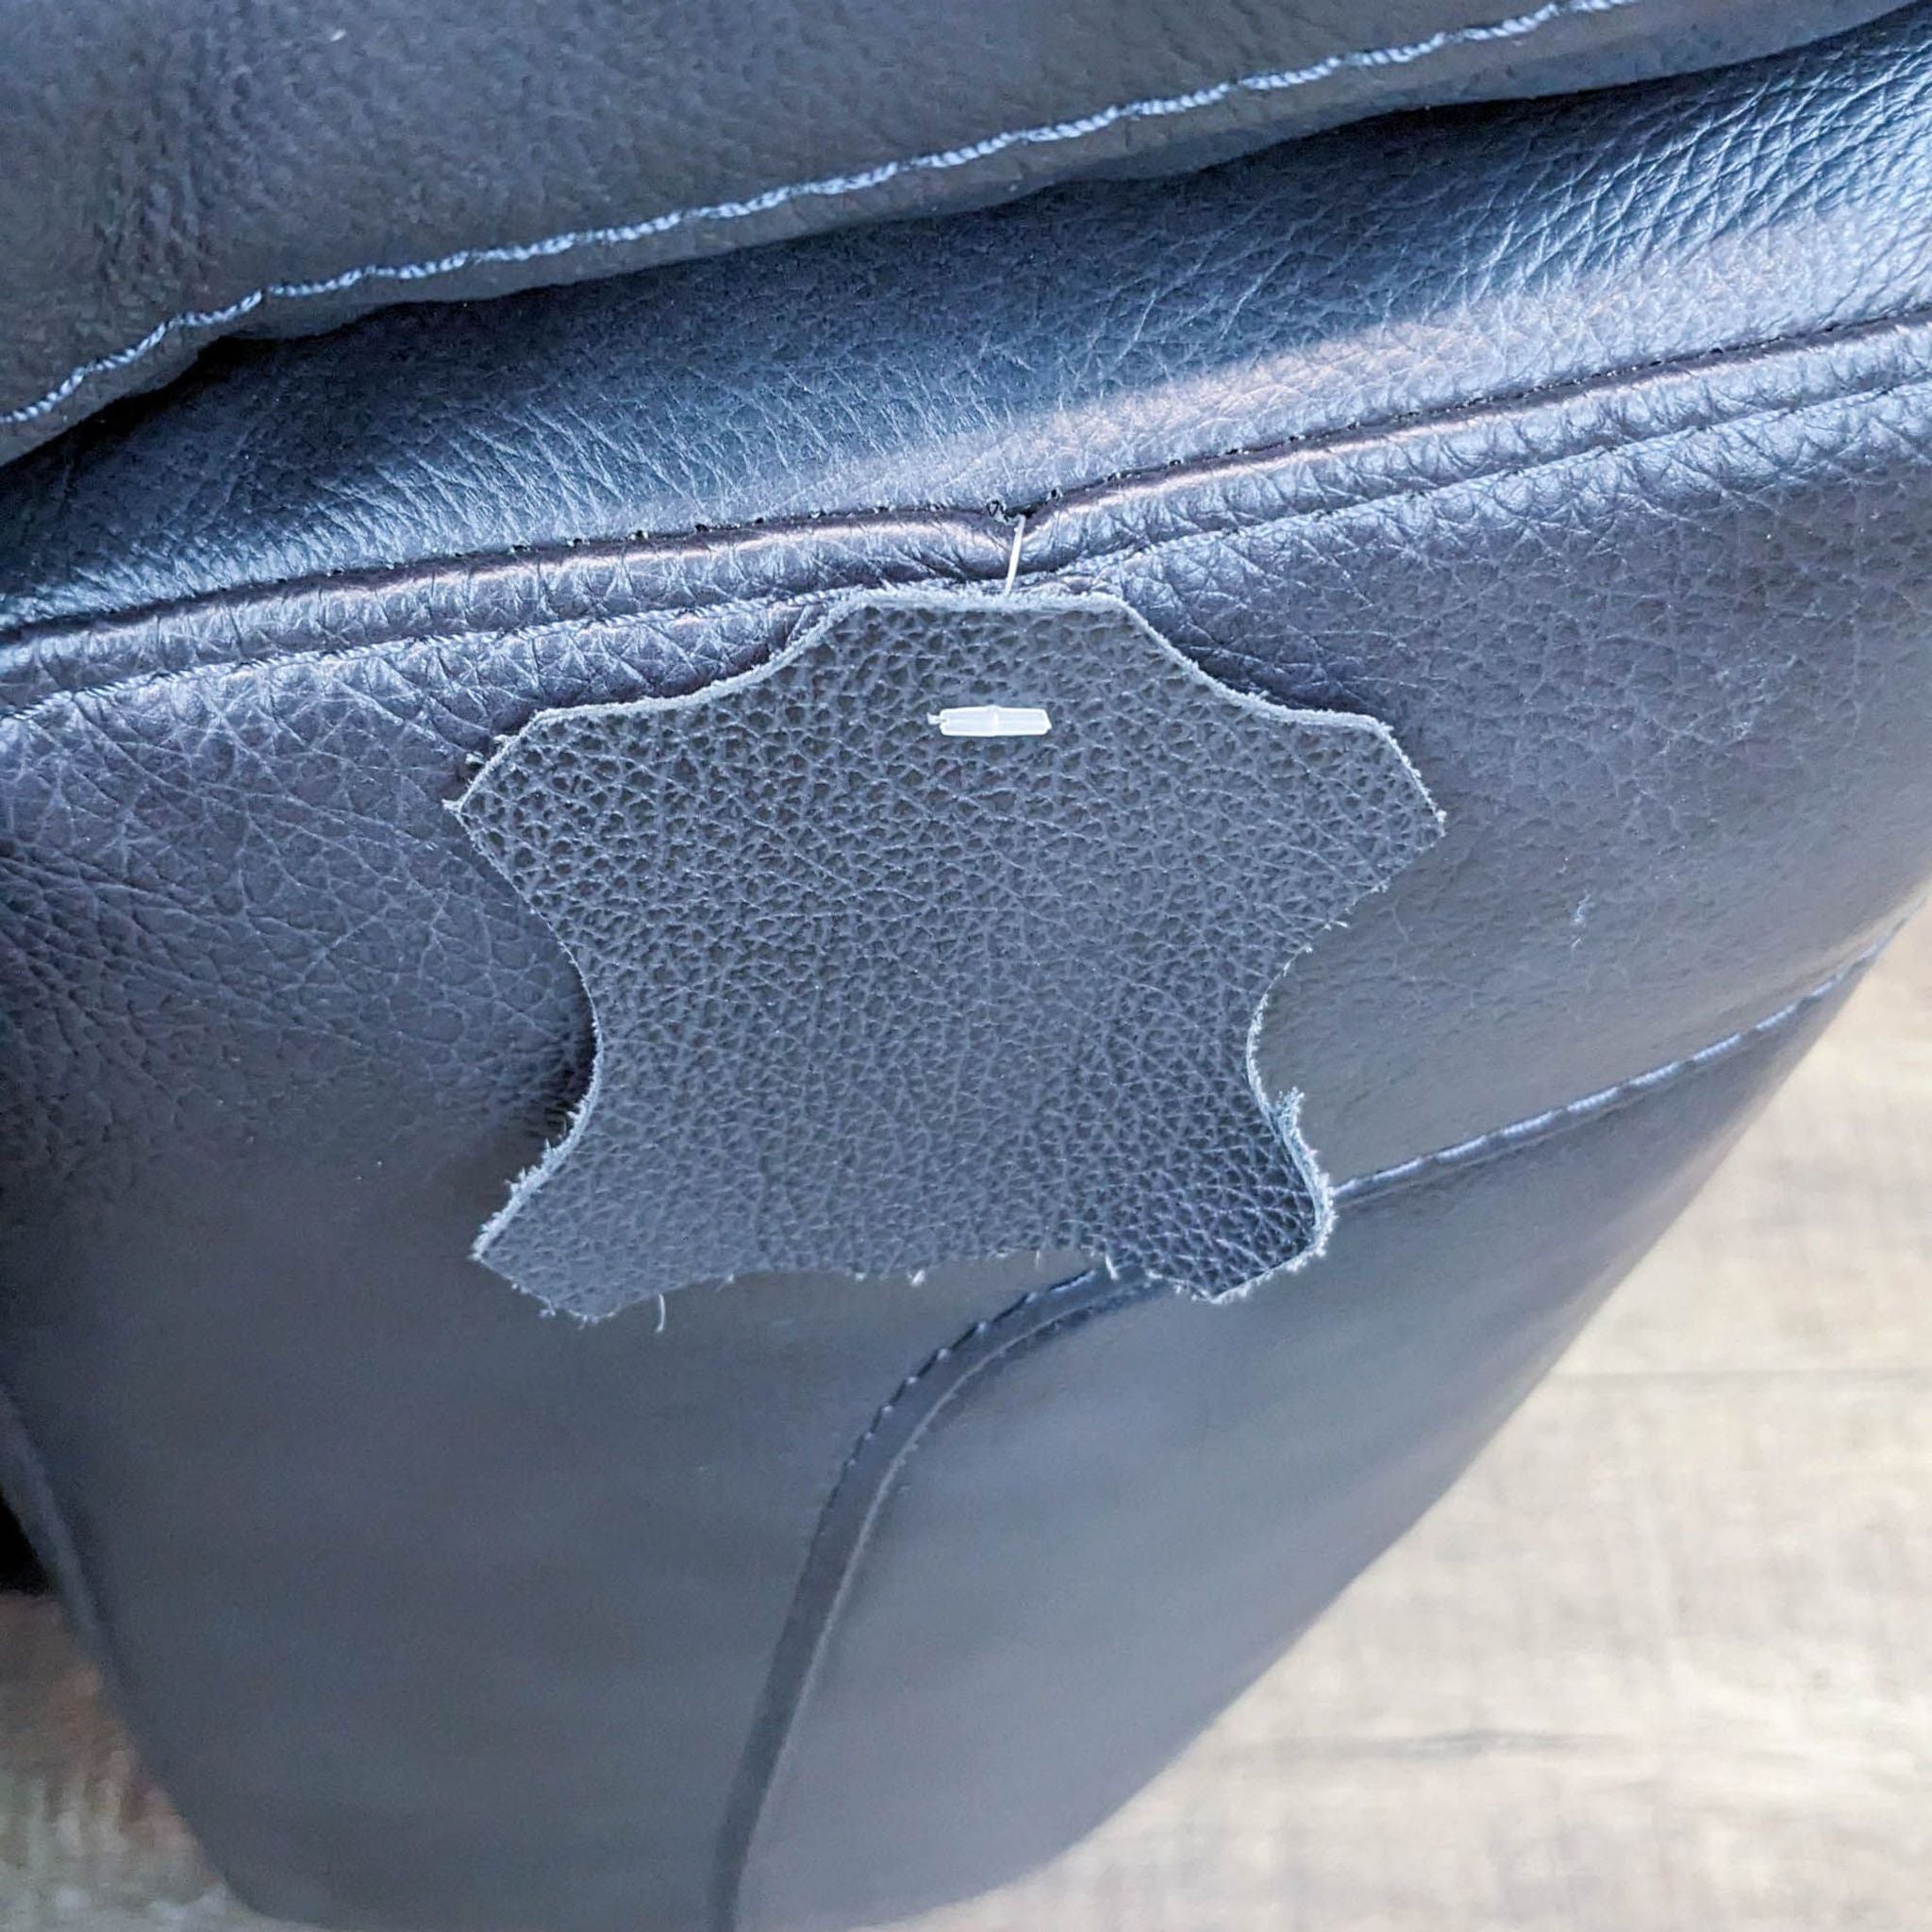 Alt text: Close-up of a damaged area on a Reperch brand leather sofa showing torn upholstery with quilted side stitching detail.